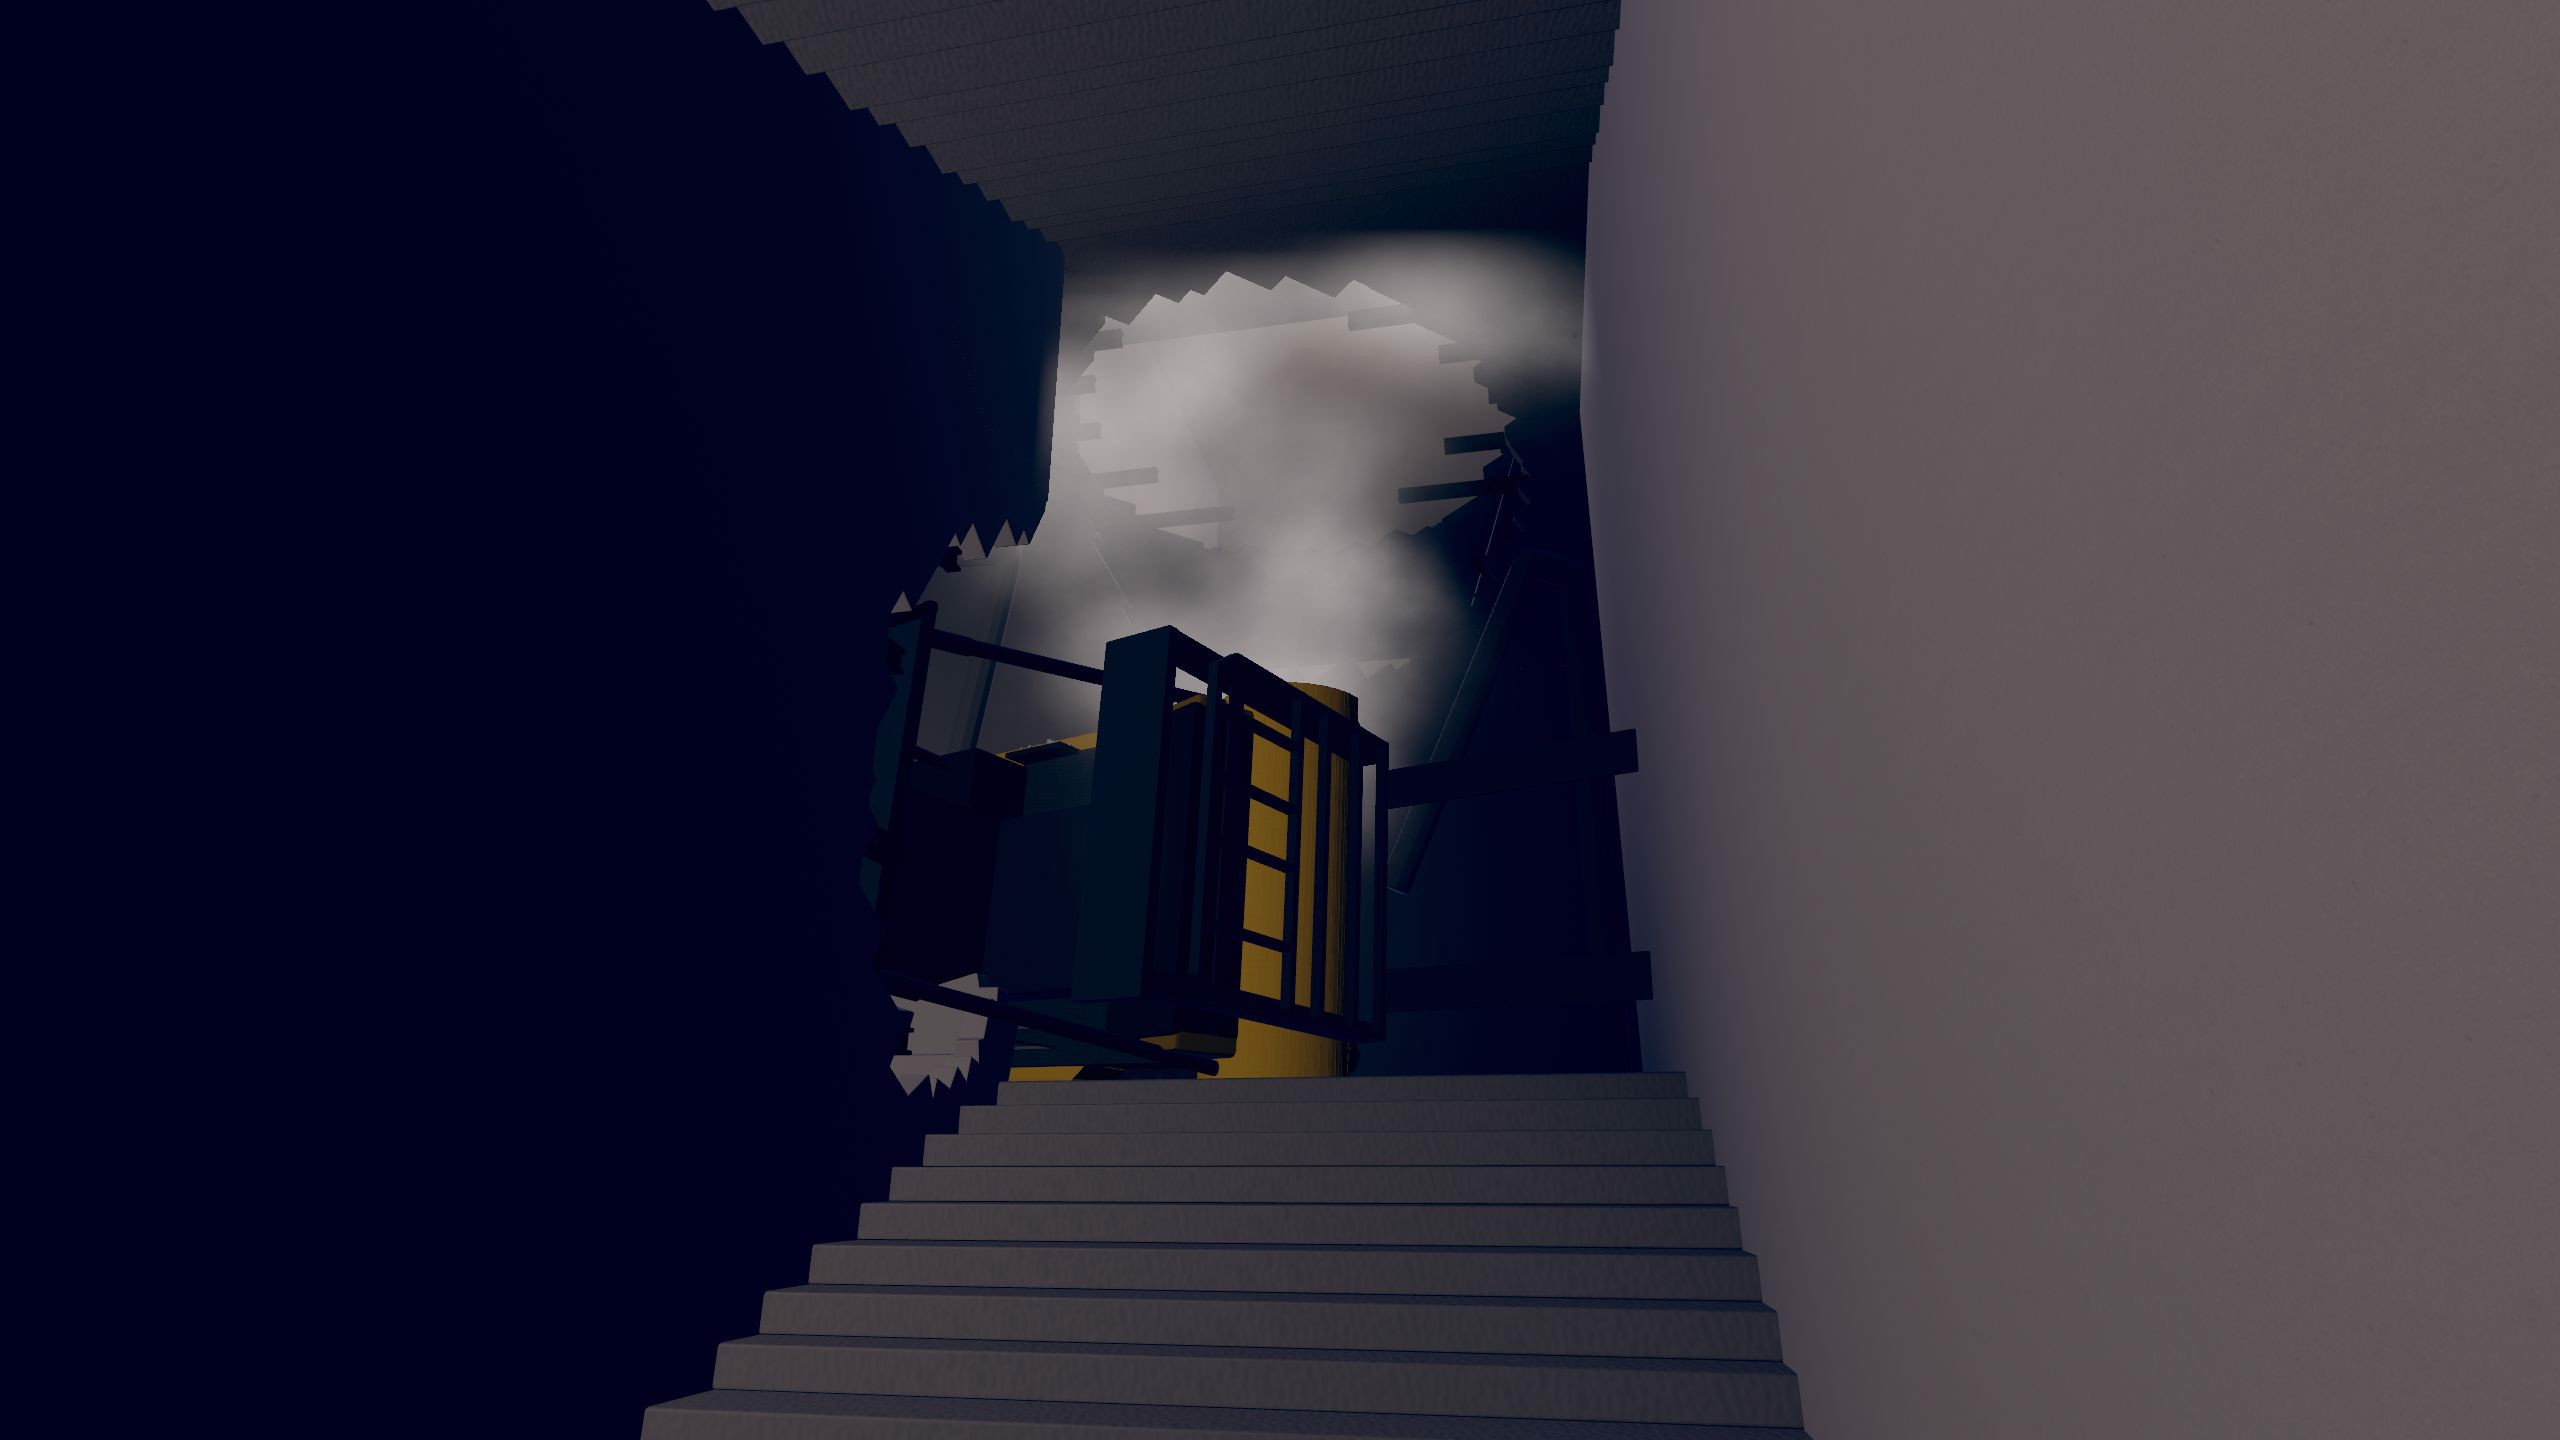 https://static.wikia.nocookie.net/thestanleyparable/images/6/69/Project_Stanley-_scrap_ending.png/revision/latest?cb=20210211130911